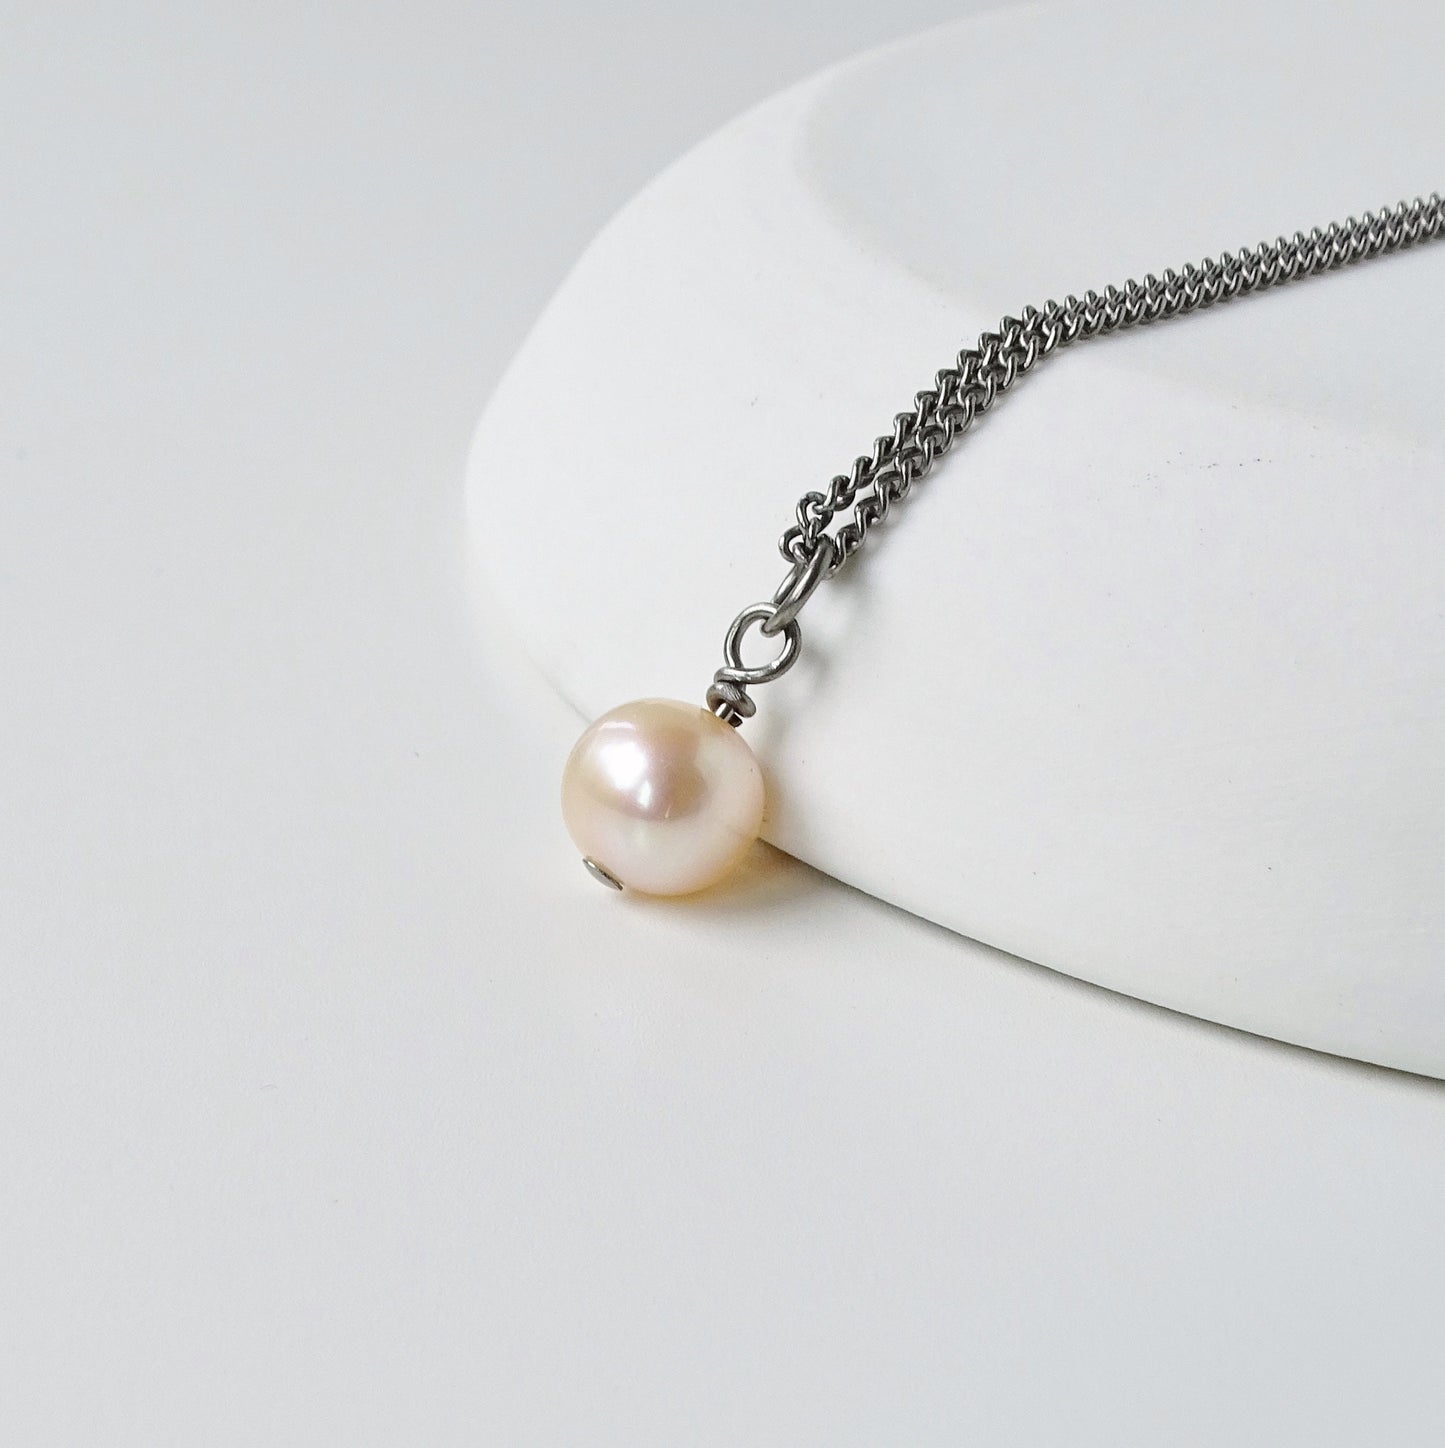 Pink Pearl Pendant Titanium Necklace, Real Pearl Necklace for Sensitive Skin, Freshwater Pearl Titanium Jewelry, Hypoallergenic Nickel Free